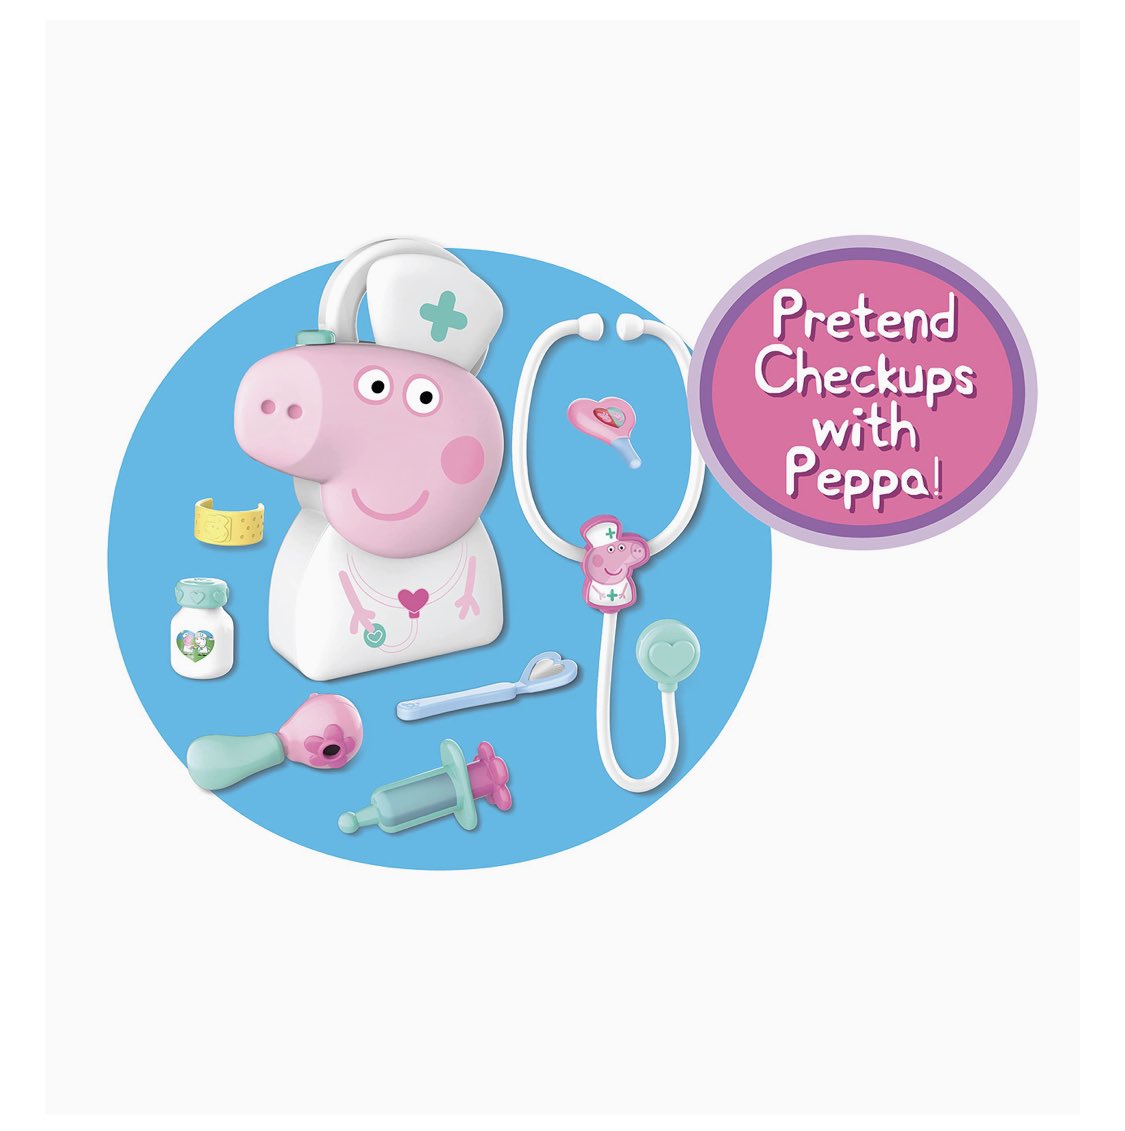 Looking for a fun, educational toy? The Peppa Pig Doctor Kit is perfect! It's fun and educational, bringing joy to playtime.
Learn more now for your little ones! healthymumandbub.com/peppa-pig-doct…
#PeppaPig #ToddlerFun #ImaginativePlay
#LearningThroughPlay
#FineMotorSkills